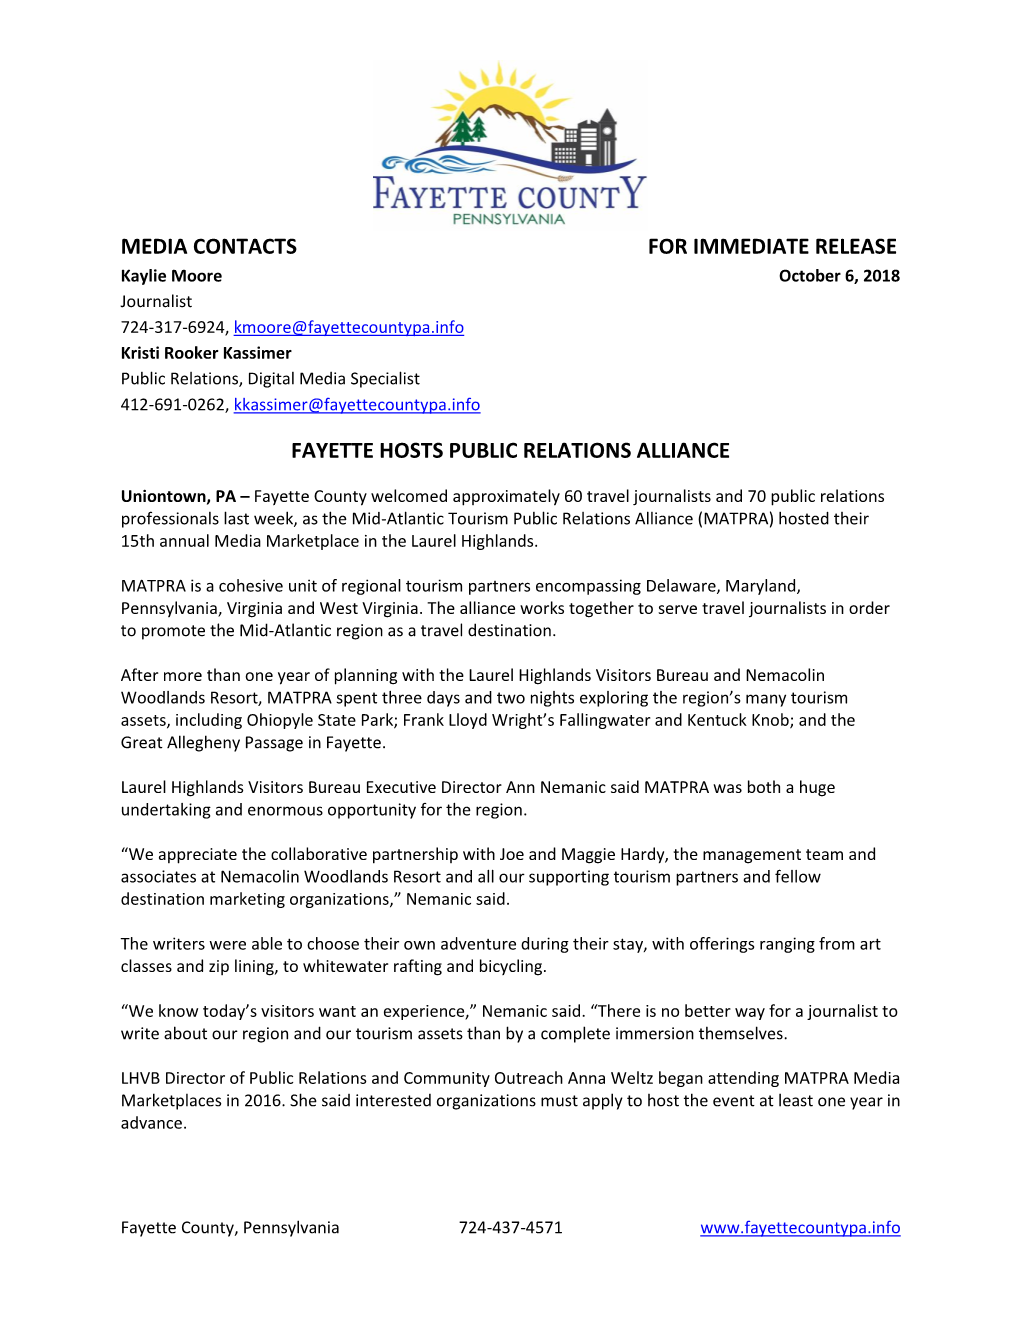 Media Contacts for Immediate Release Fayette Hosts